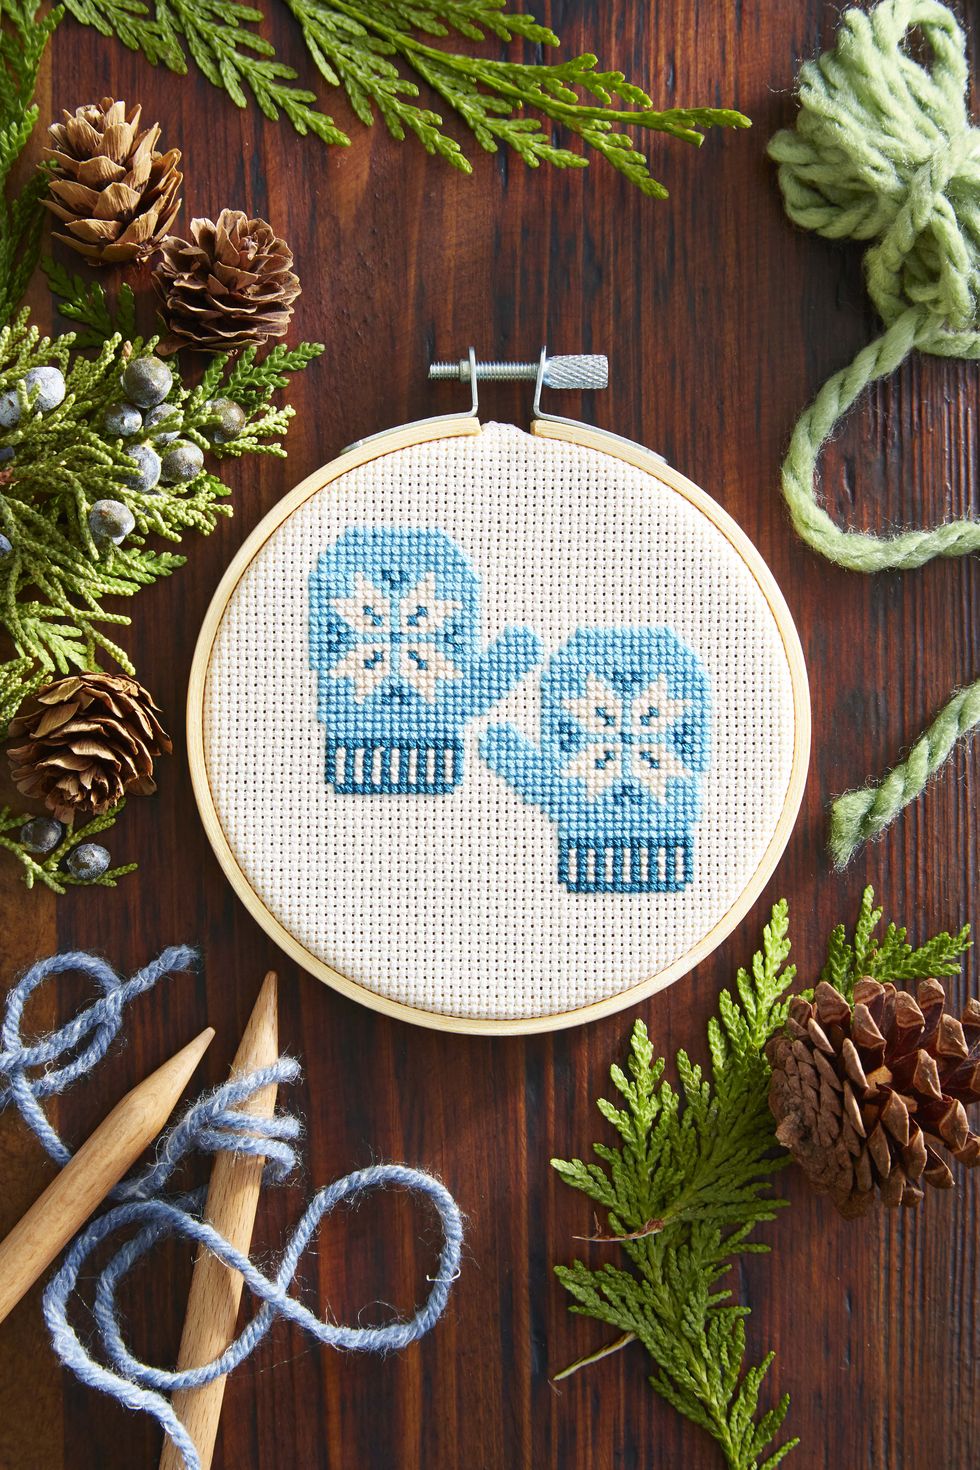 stitch.ly counted cross stitch kits for beginners - adults and kids. 6  cross stitch patterns, including 1 stamped pattern. al